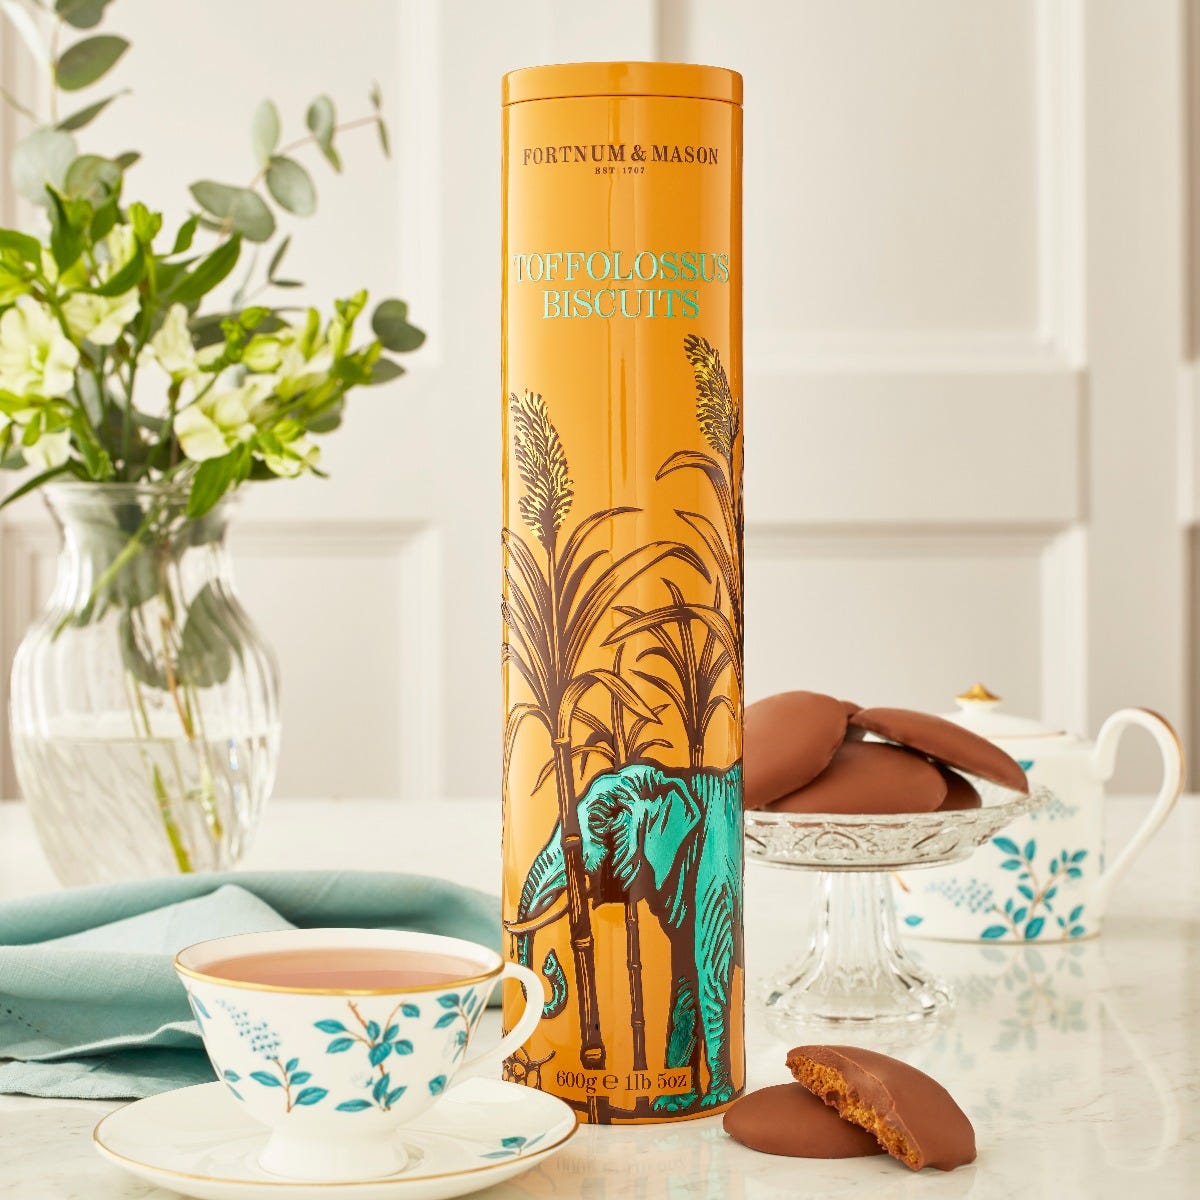 Toffolossus Biscuits, 600g, Fortnum & Mason